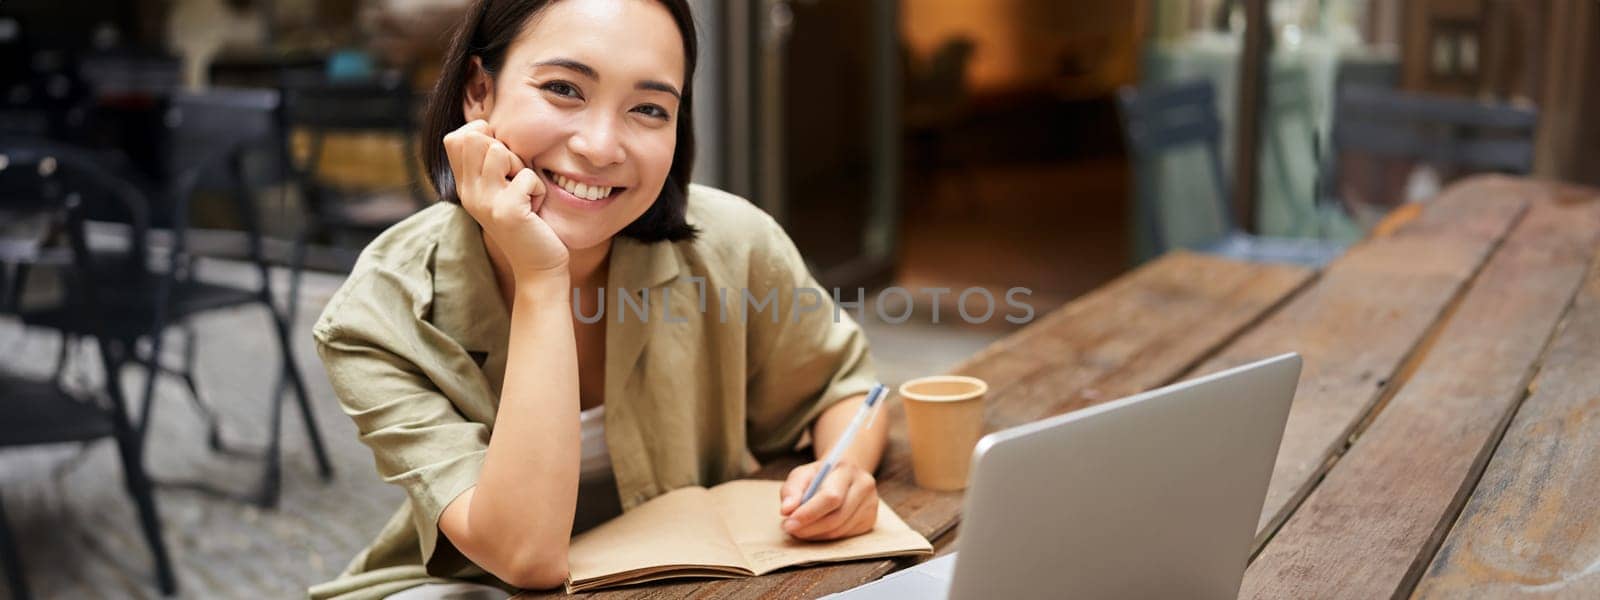 Portrait of young korean girl making notes, listening online meeting, lecture, looking at laptop screen, working remotely from cafe.